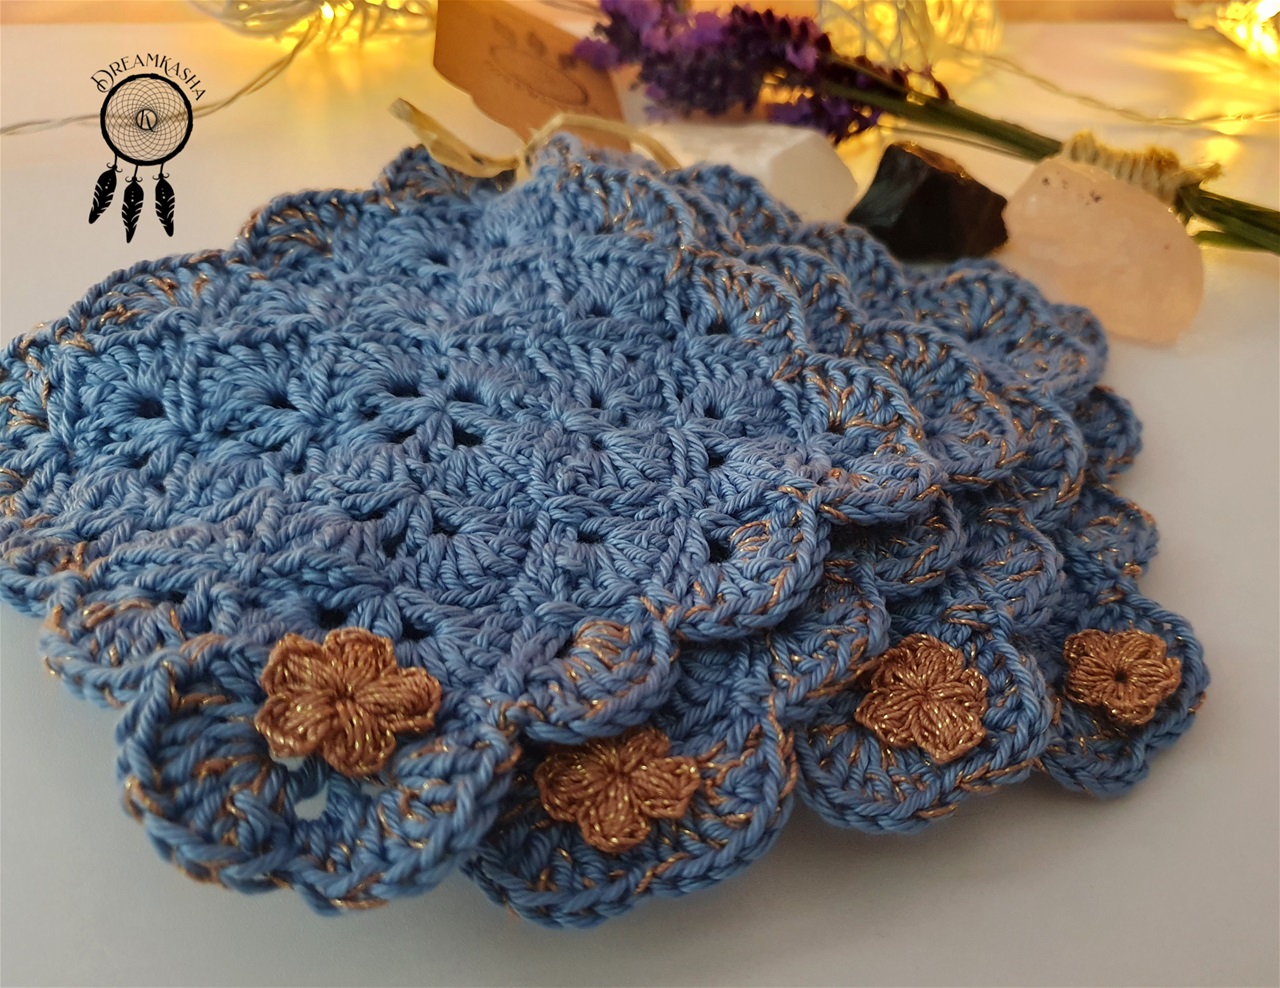 Crochet coasters made with cotton yarn and lots of love